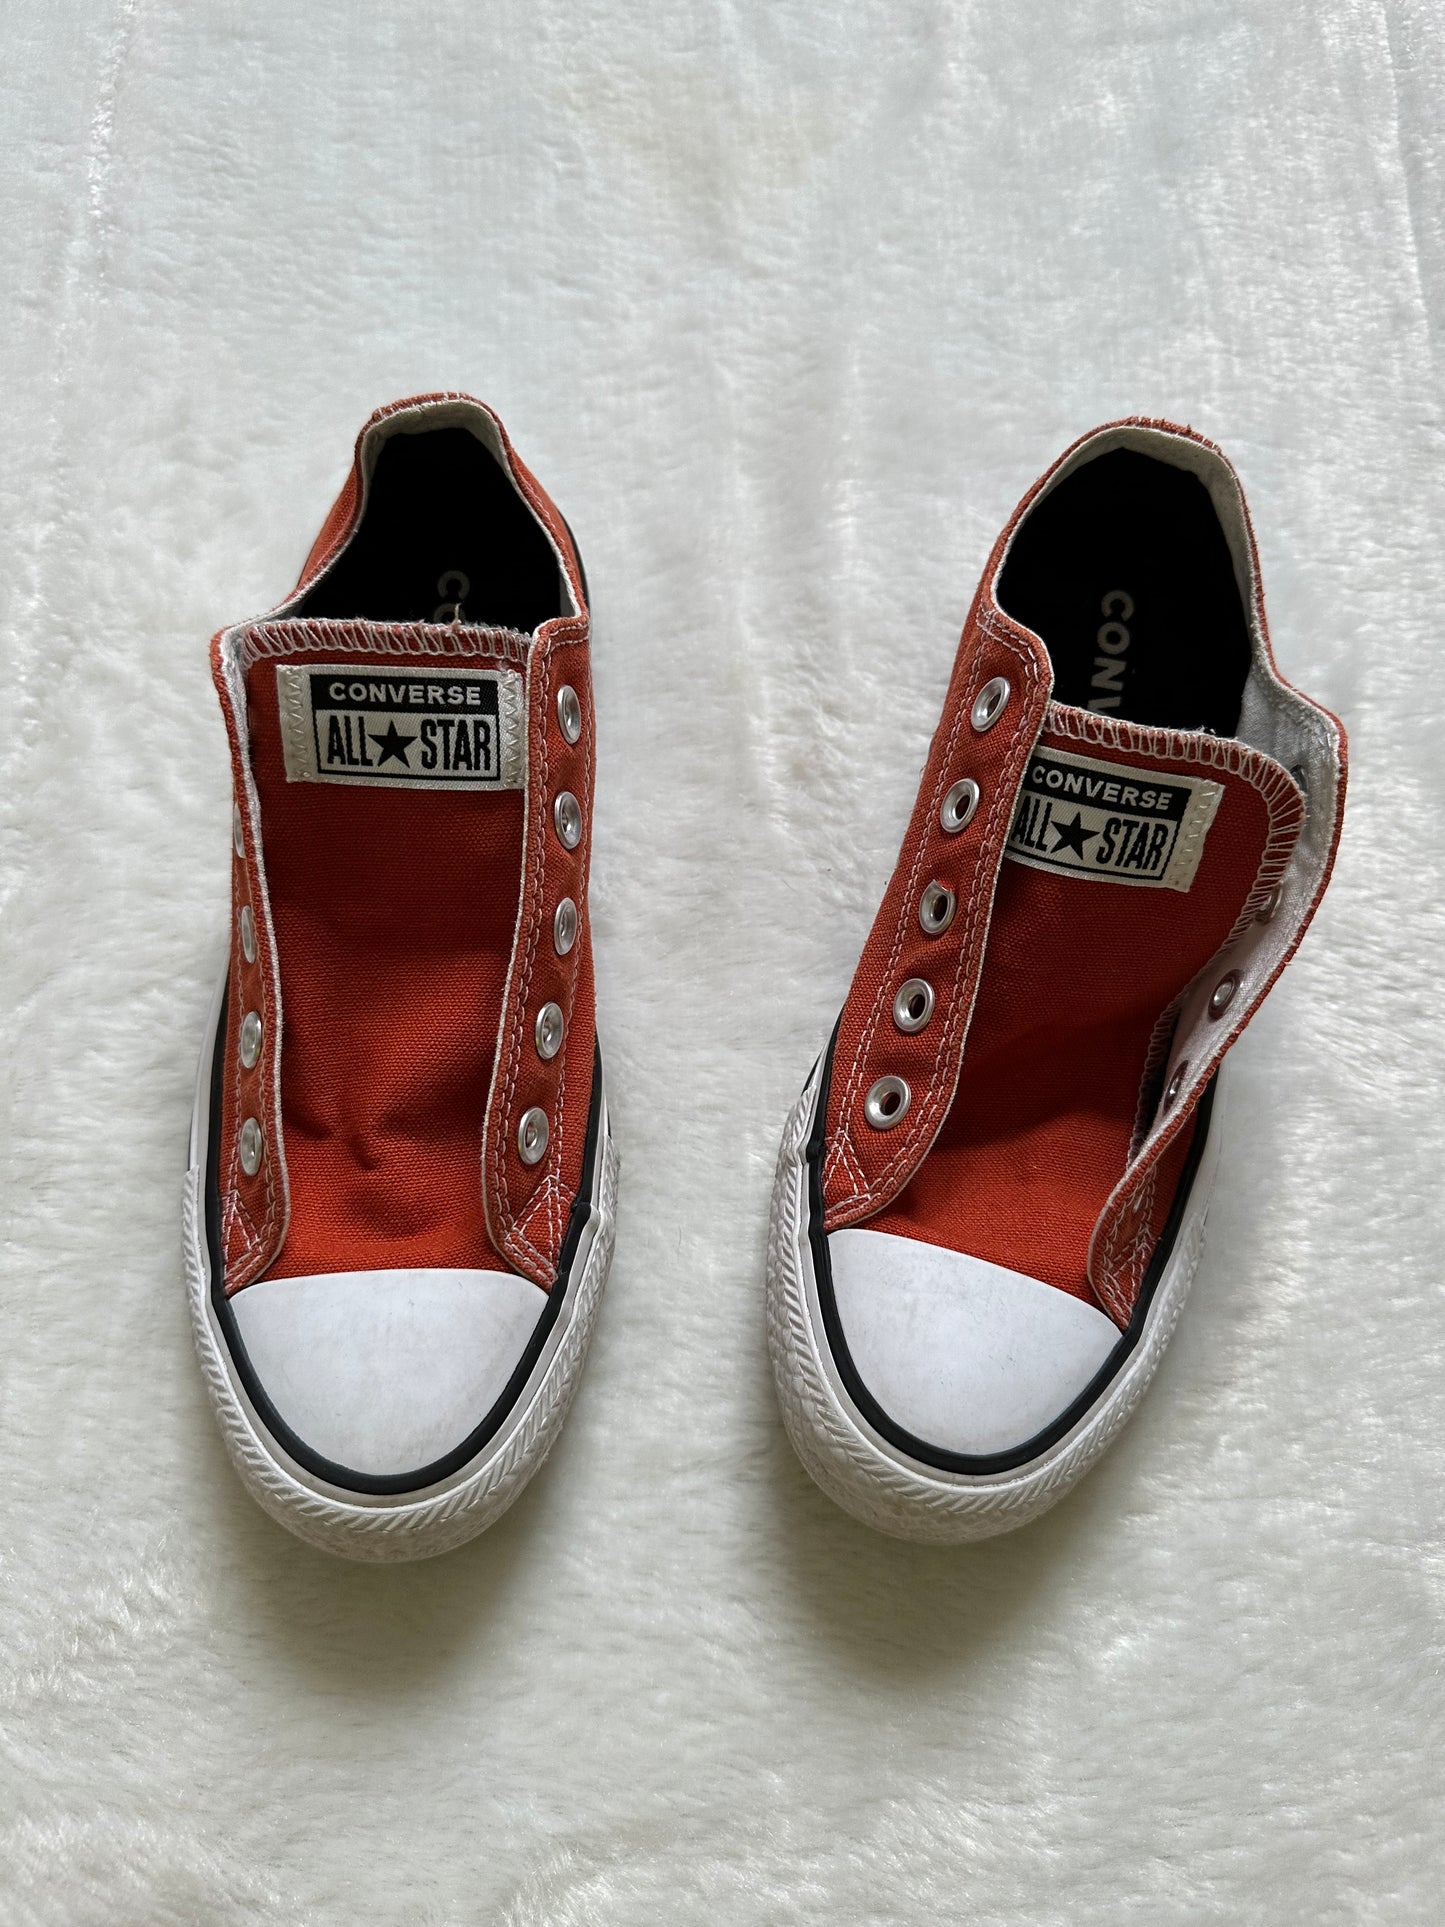 Low Rise Converse Sneakers